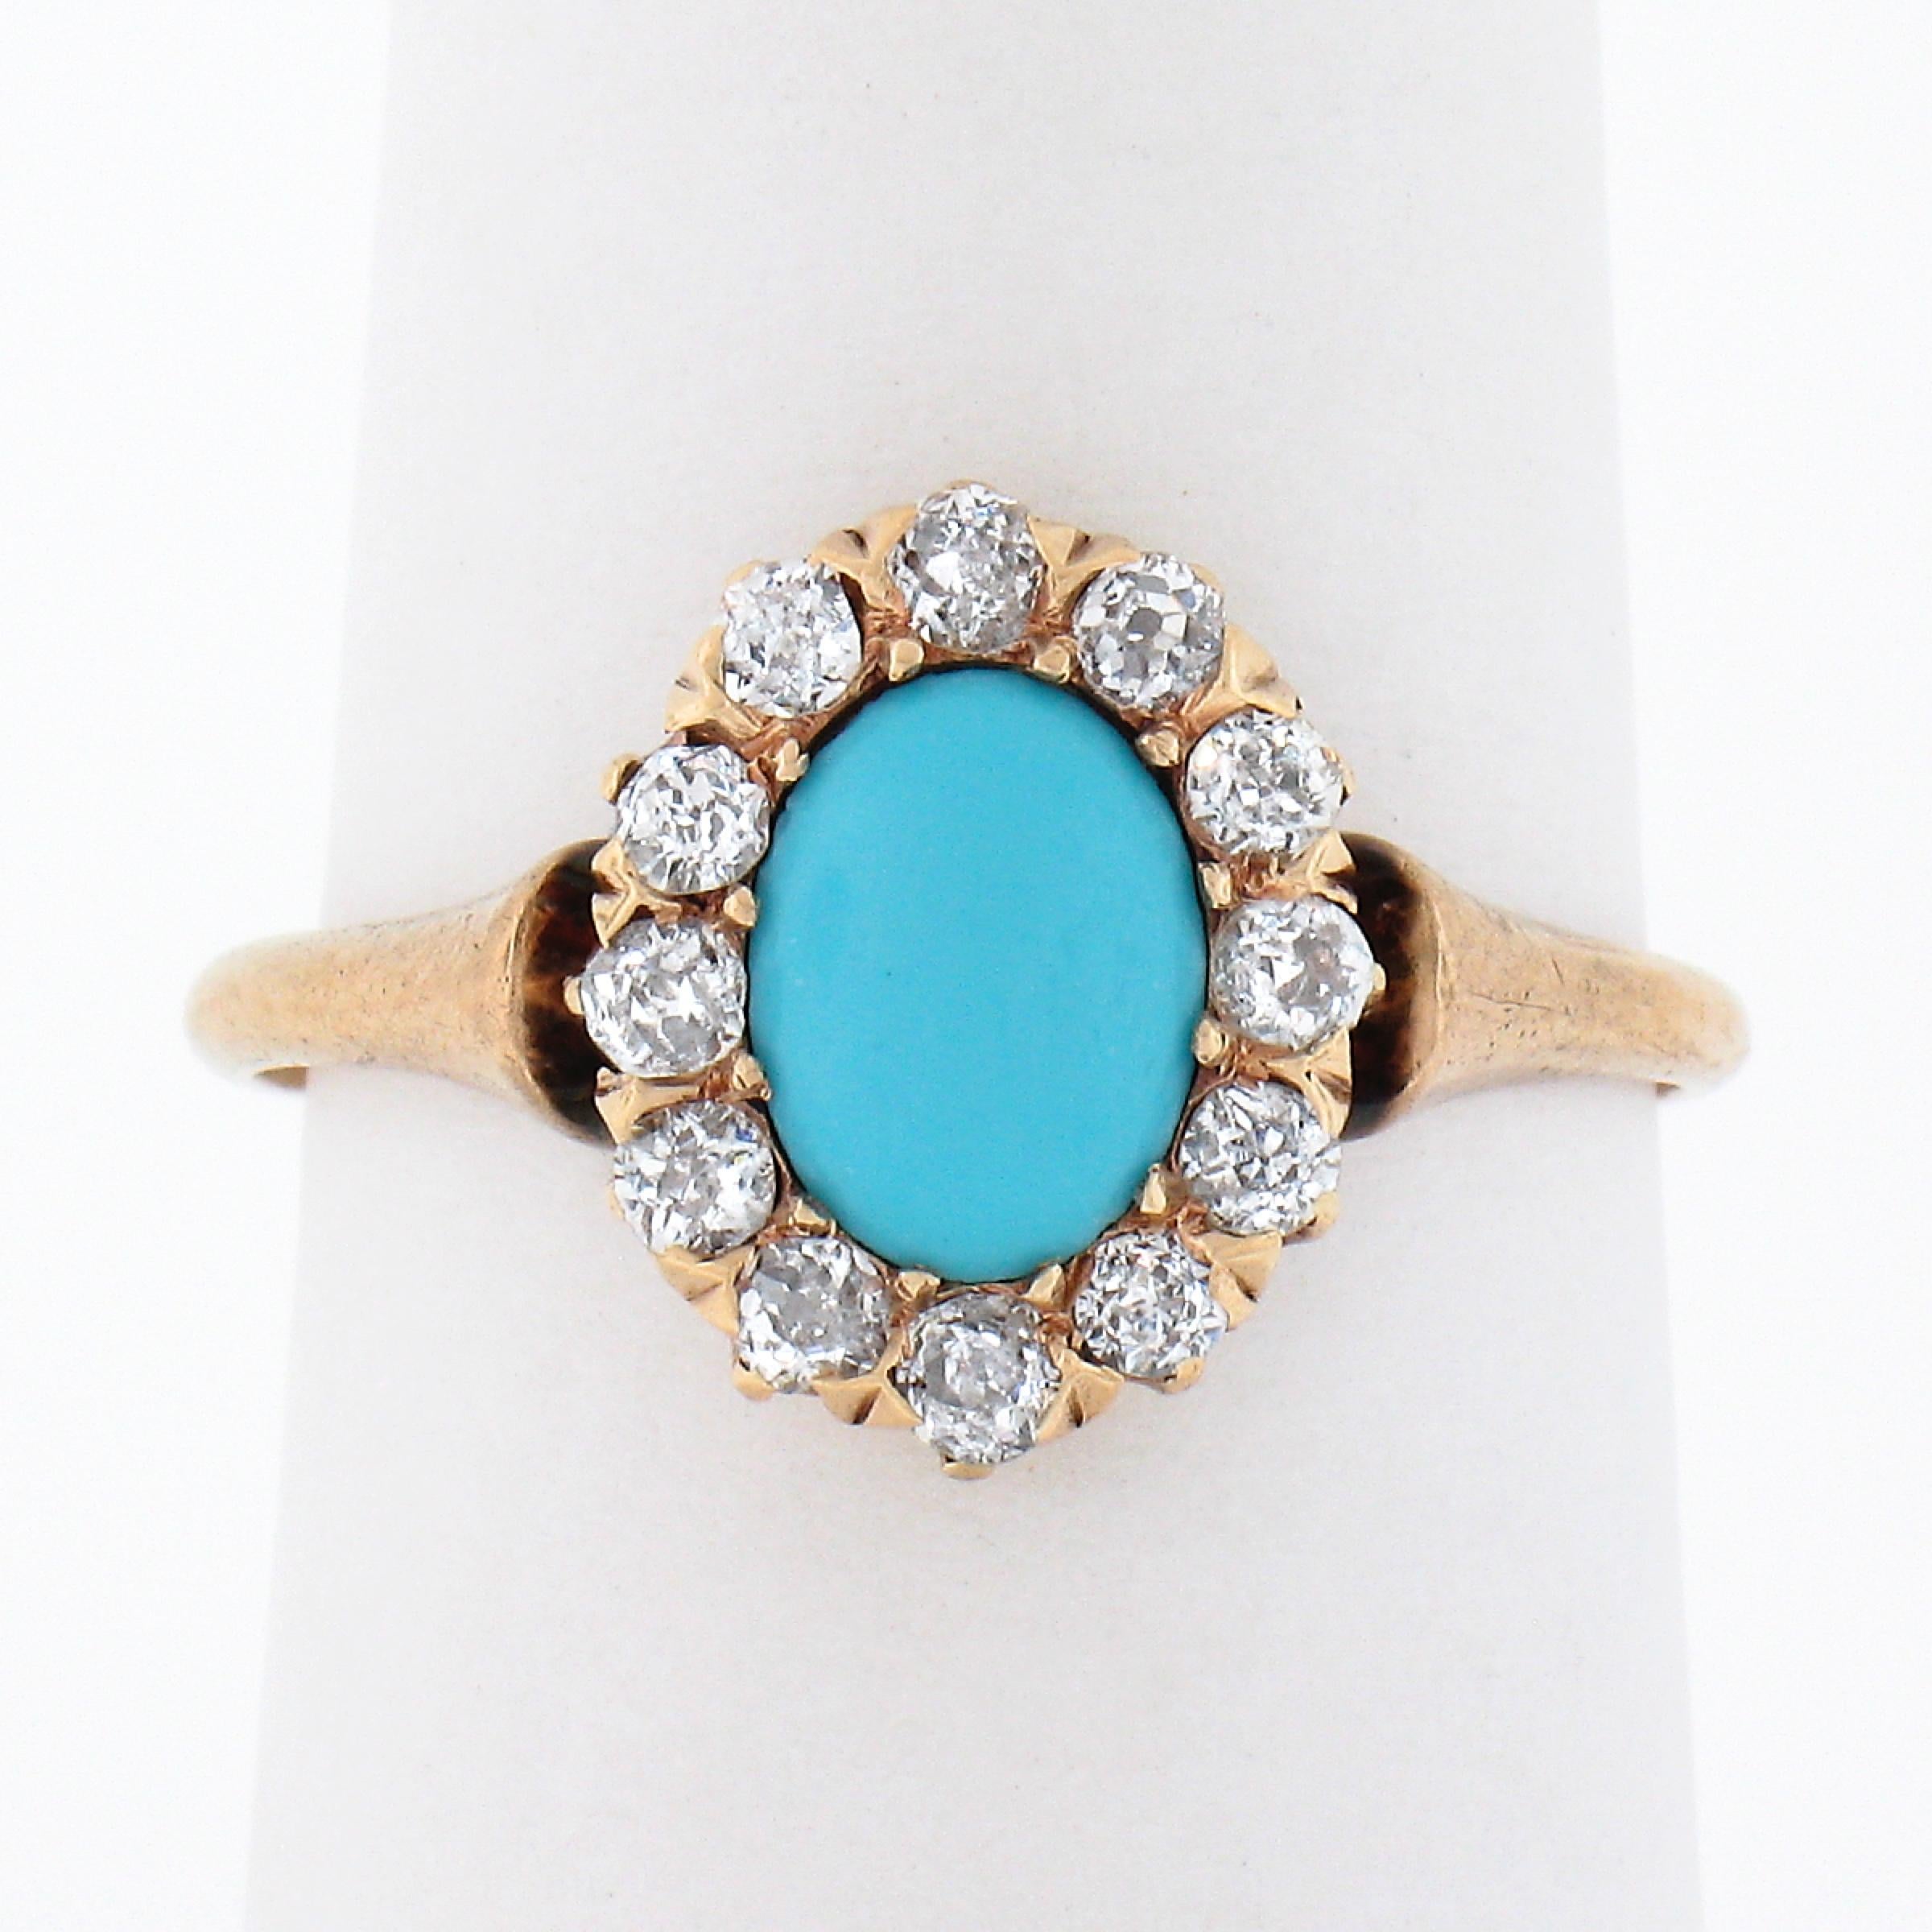 This lovely antique ring was crafted during the Victorian era in solid 14k gold and features a beautiful natural turquoise stone neatly set at the center of a lively old mine cut diamond halo. The fine oval cabochon cut turquoise shows a gorgeous